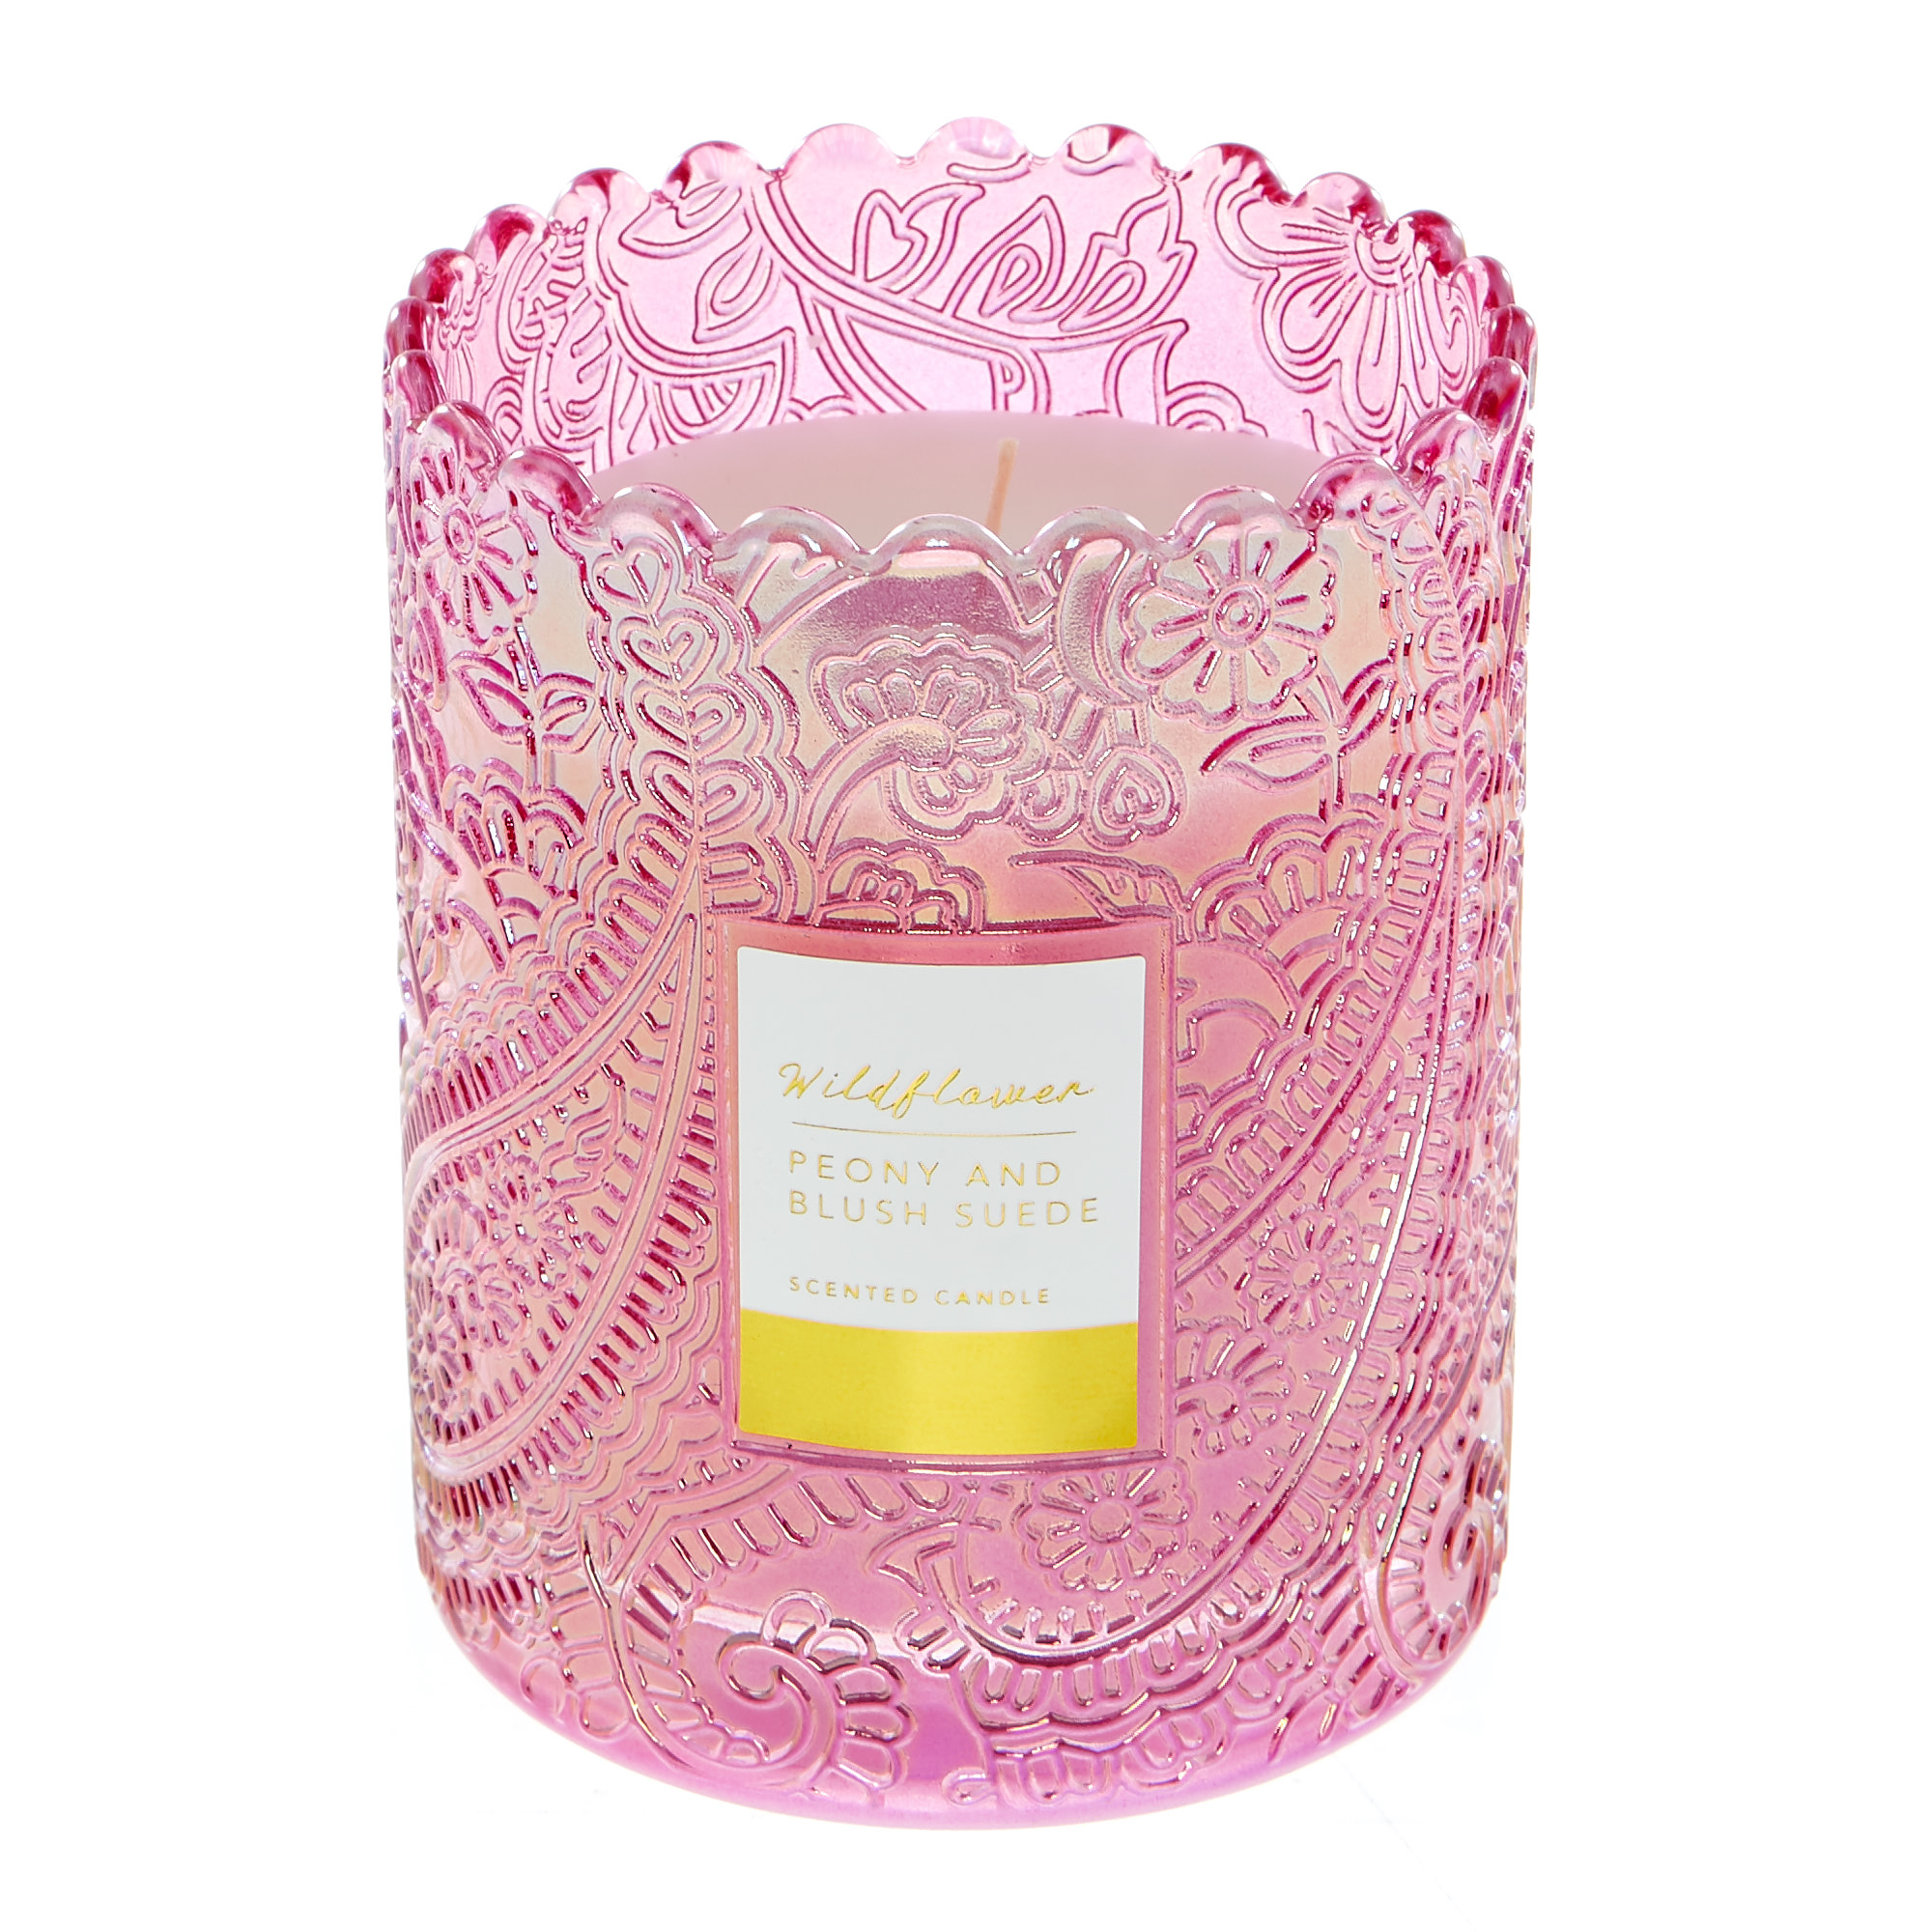 Wildflower Peony & Blush Suede Scented Candle